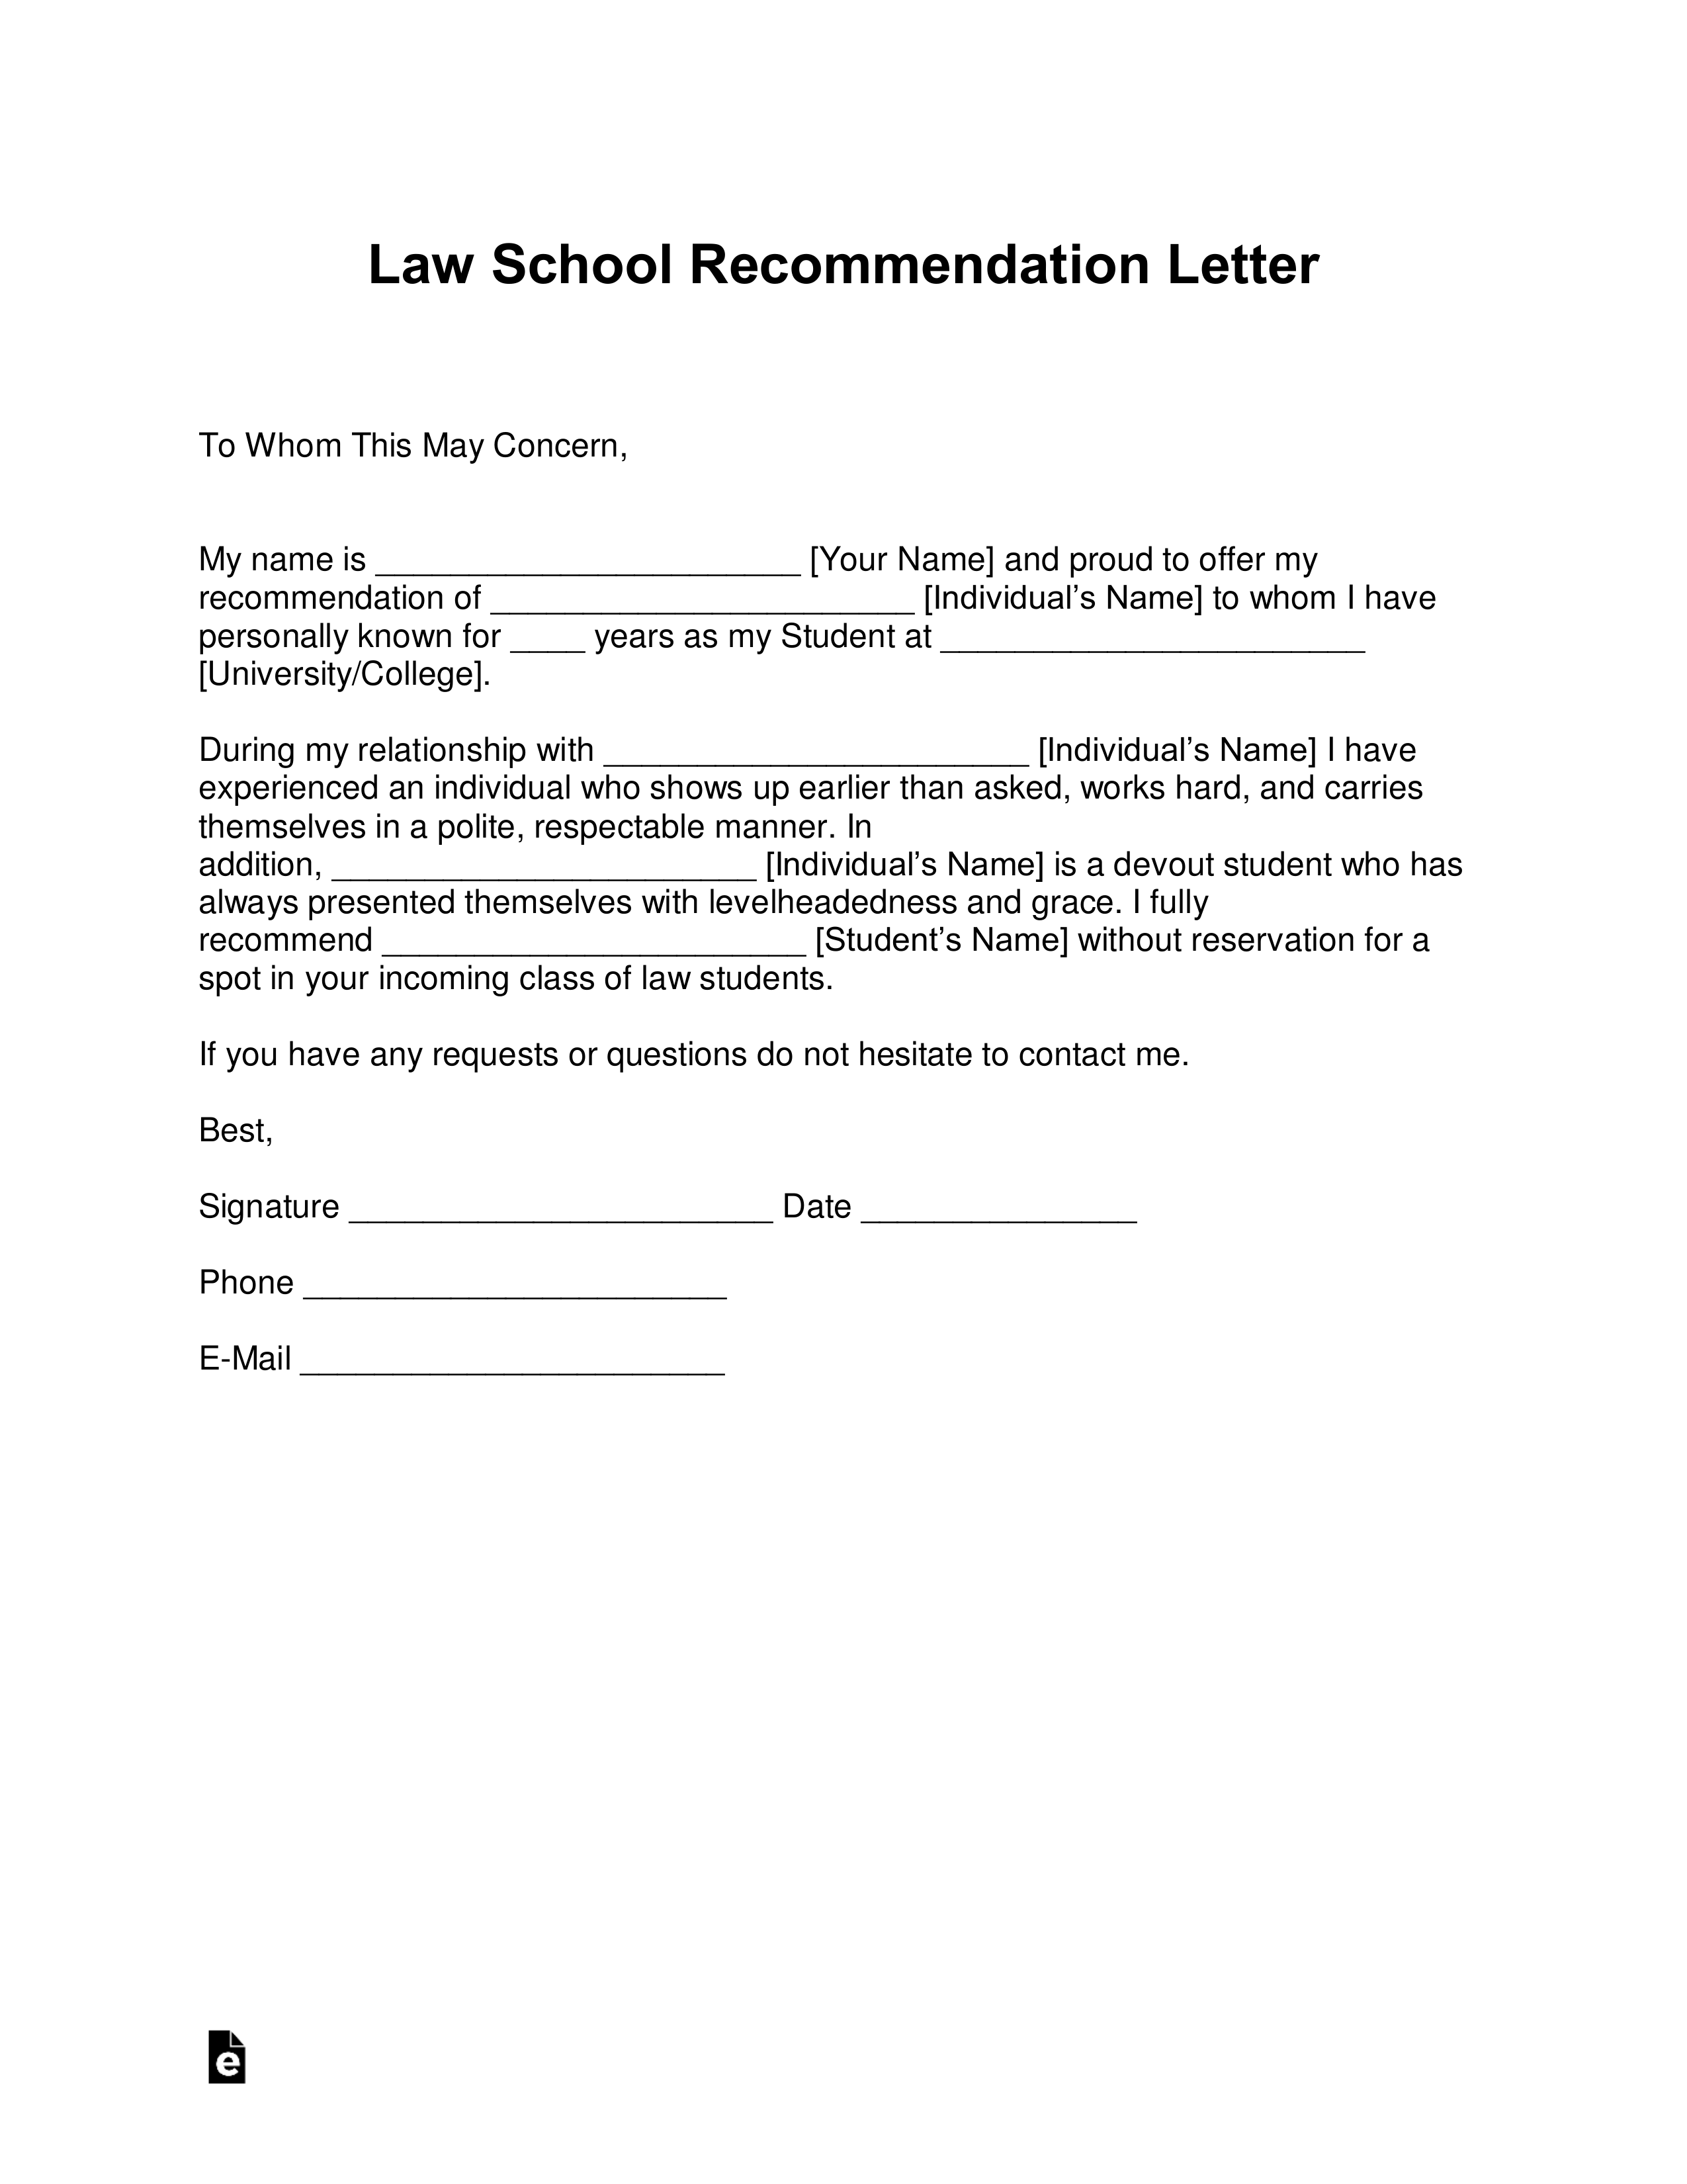 Professional Recommendation Letter Format from eforms.com